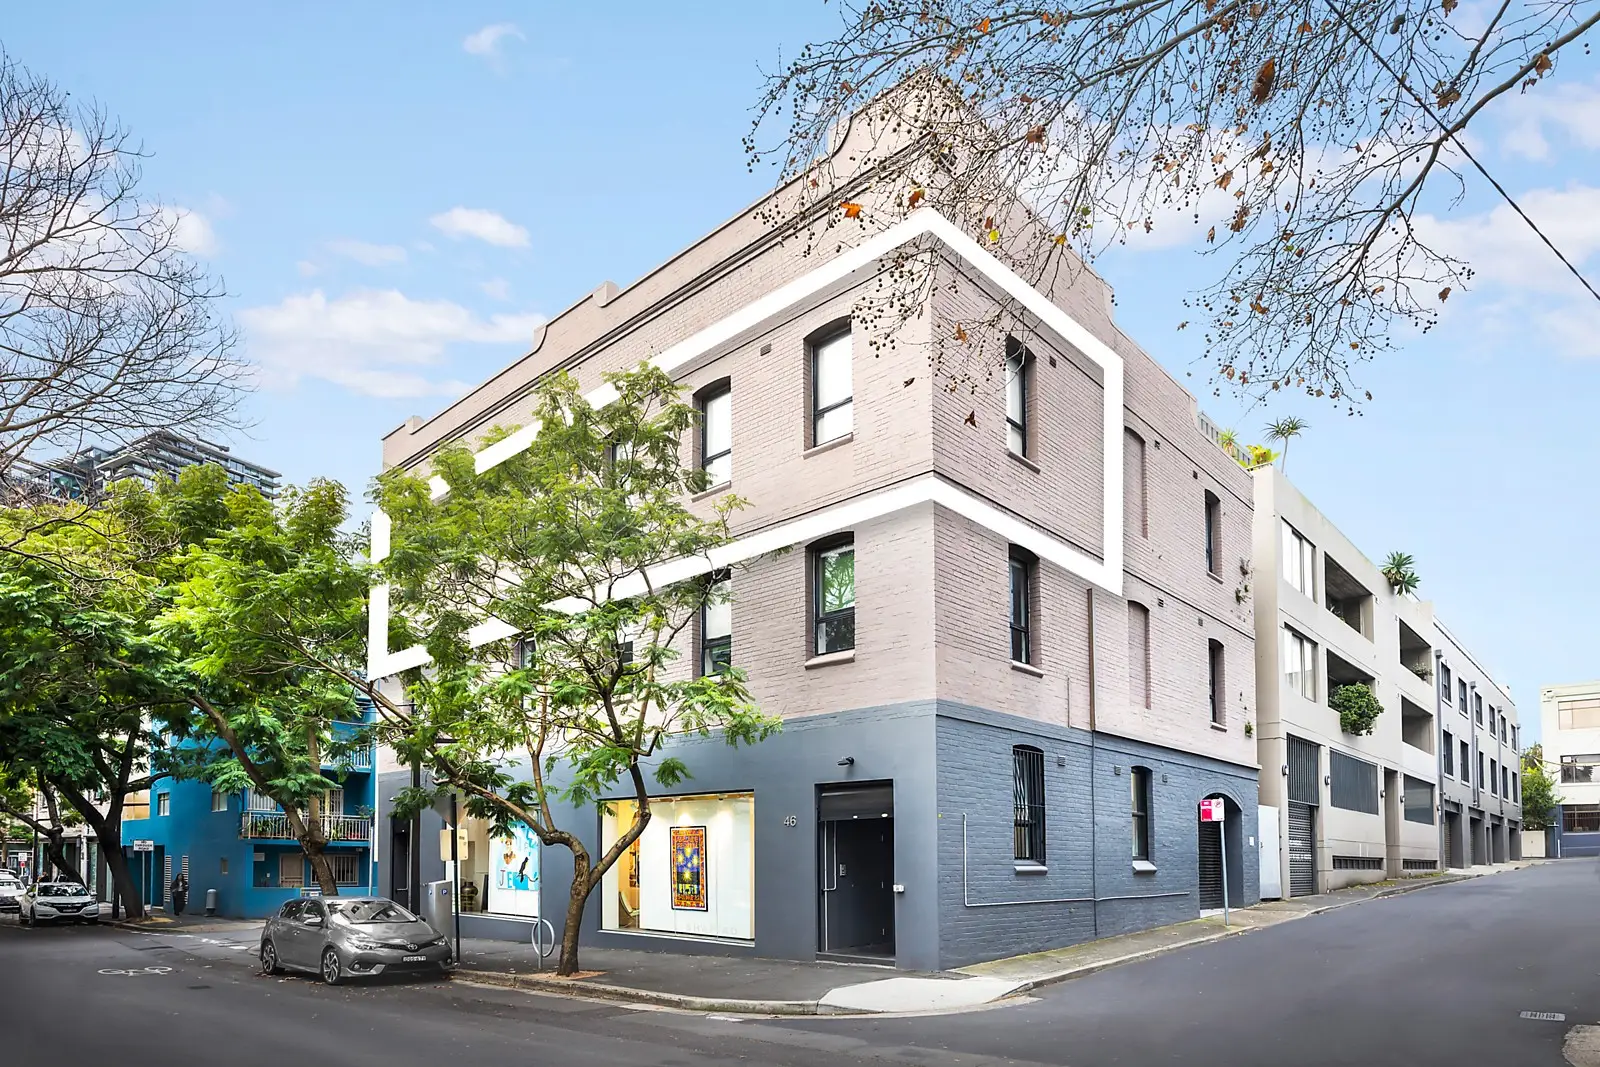 Photo #1: 6/46-48 Balfour Street, Chippendale - Sold by Sydney Sotheby's International Realty